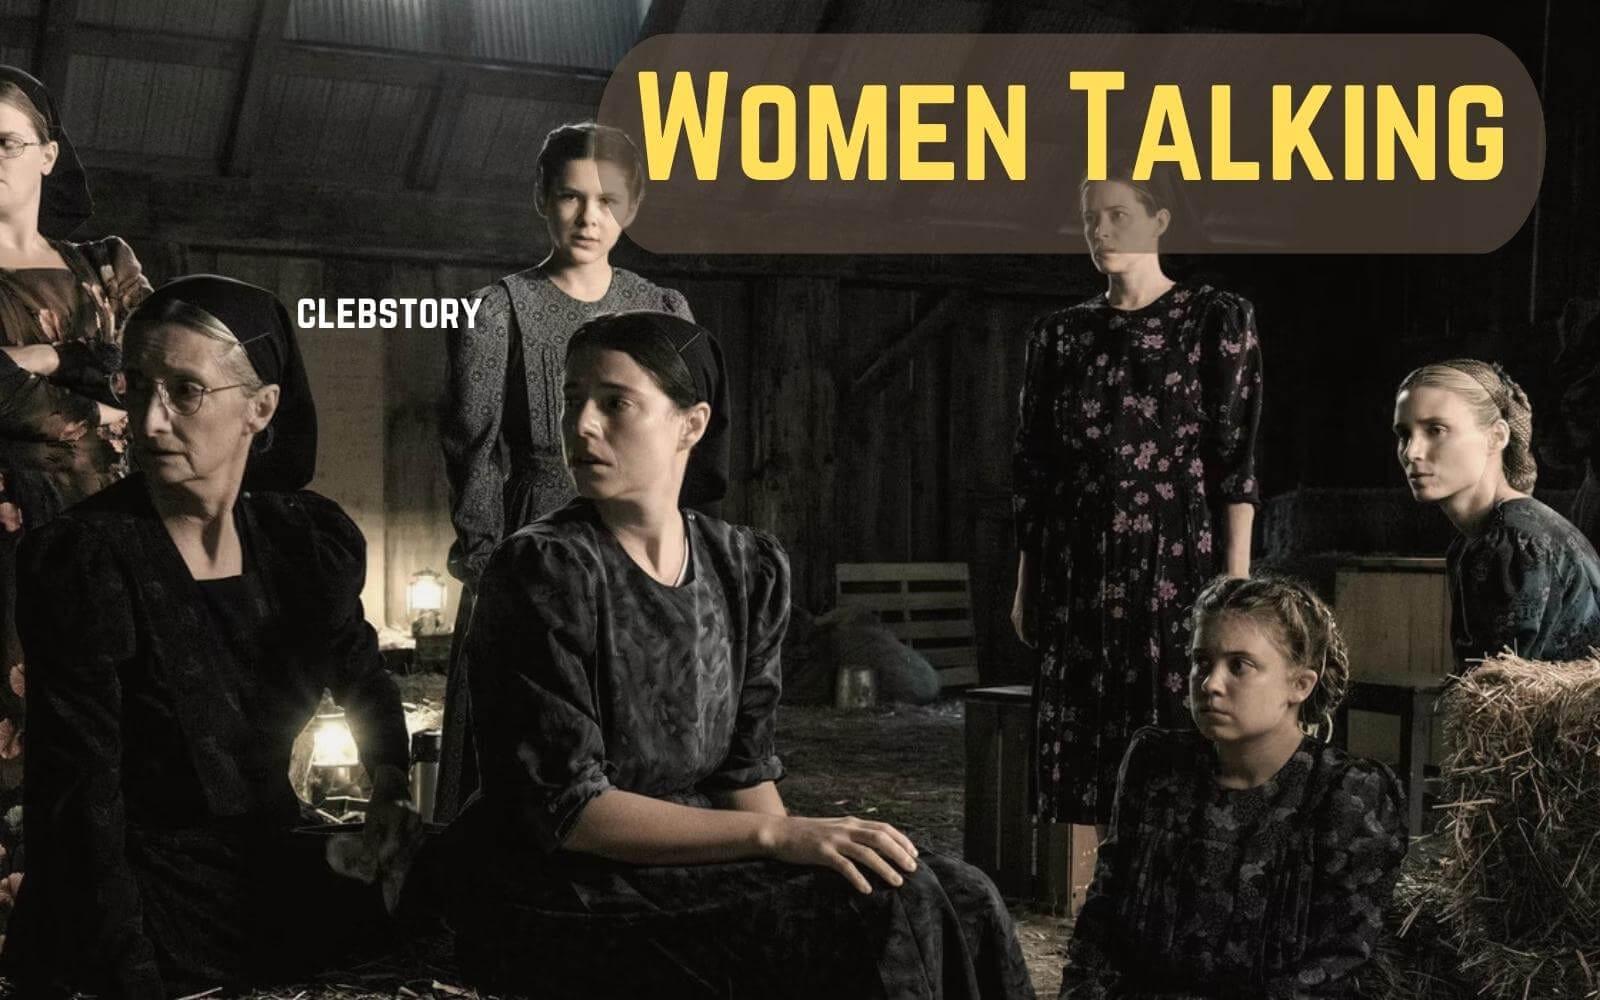 Women Talking – Movie Age Rating , Movie Rating, Parents Guide, Review, Where To Watch , Cast, Release Date And More